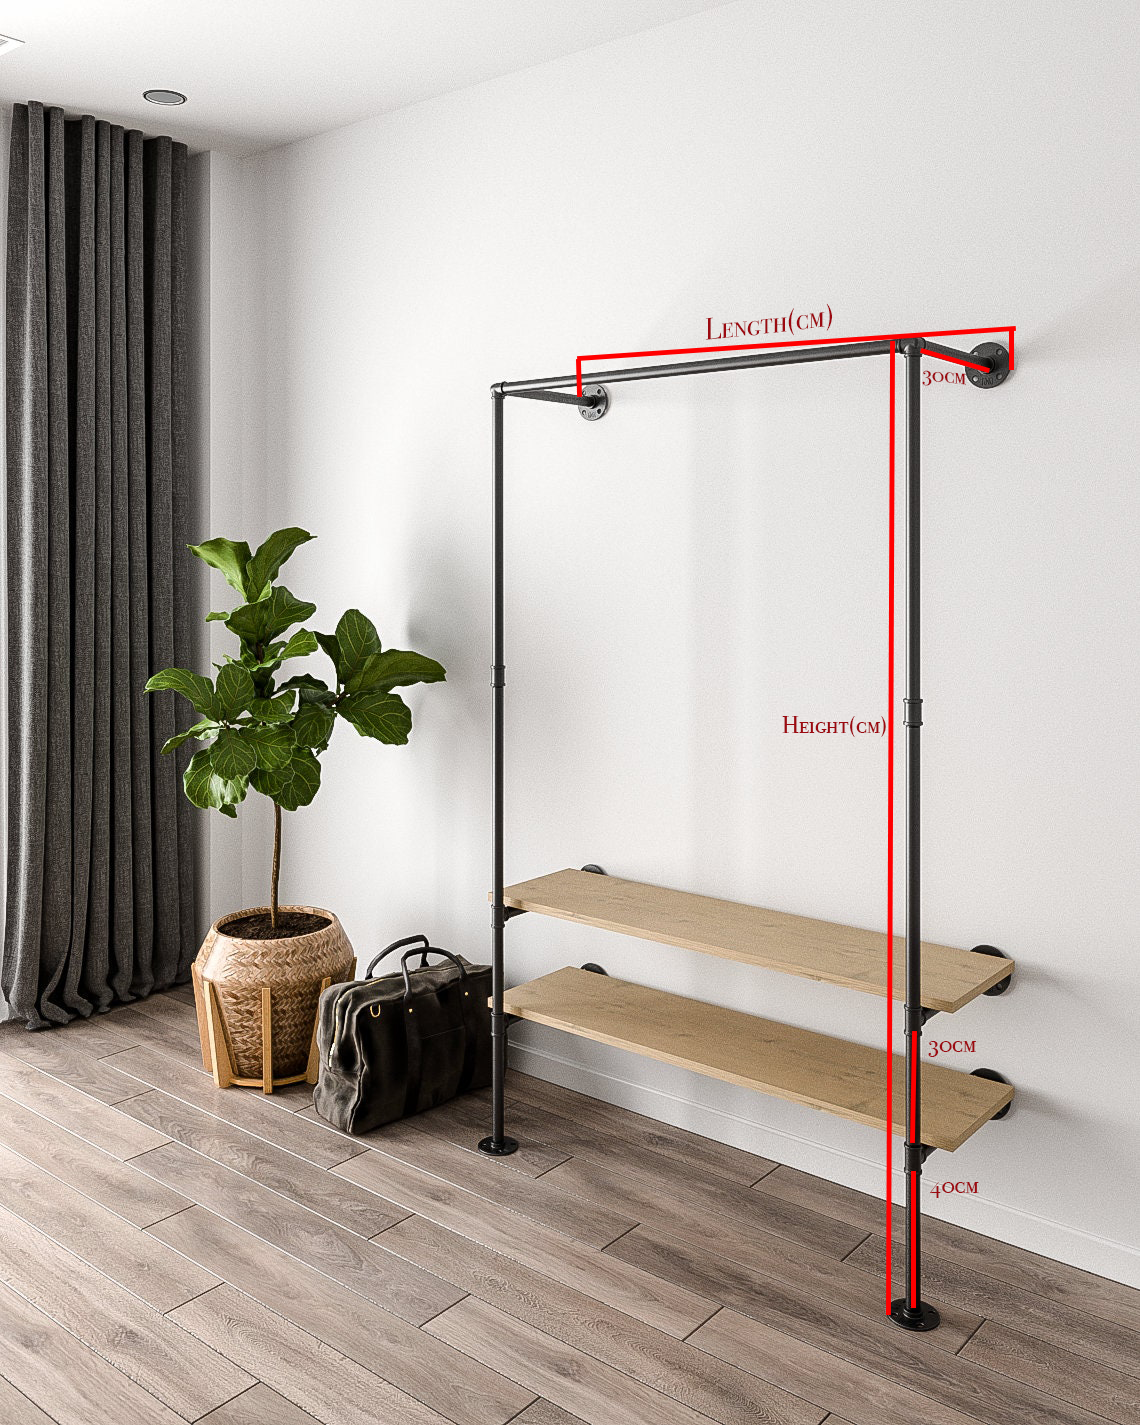 A versatile Closet Clothing Rail with hanging clothes, highlighting its space-saving design.